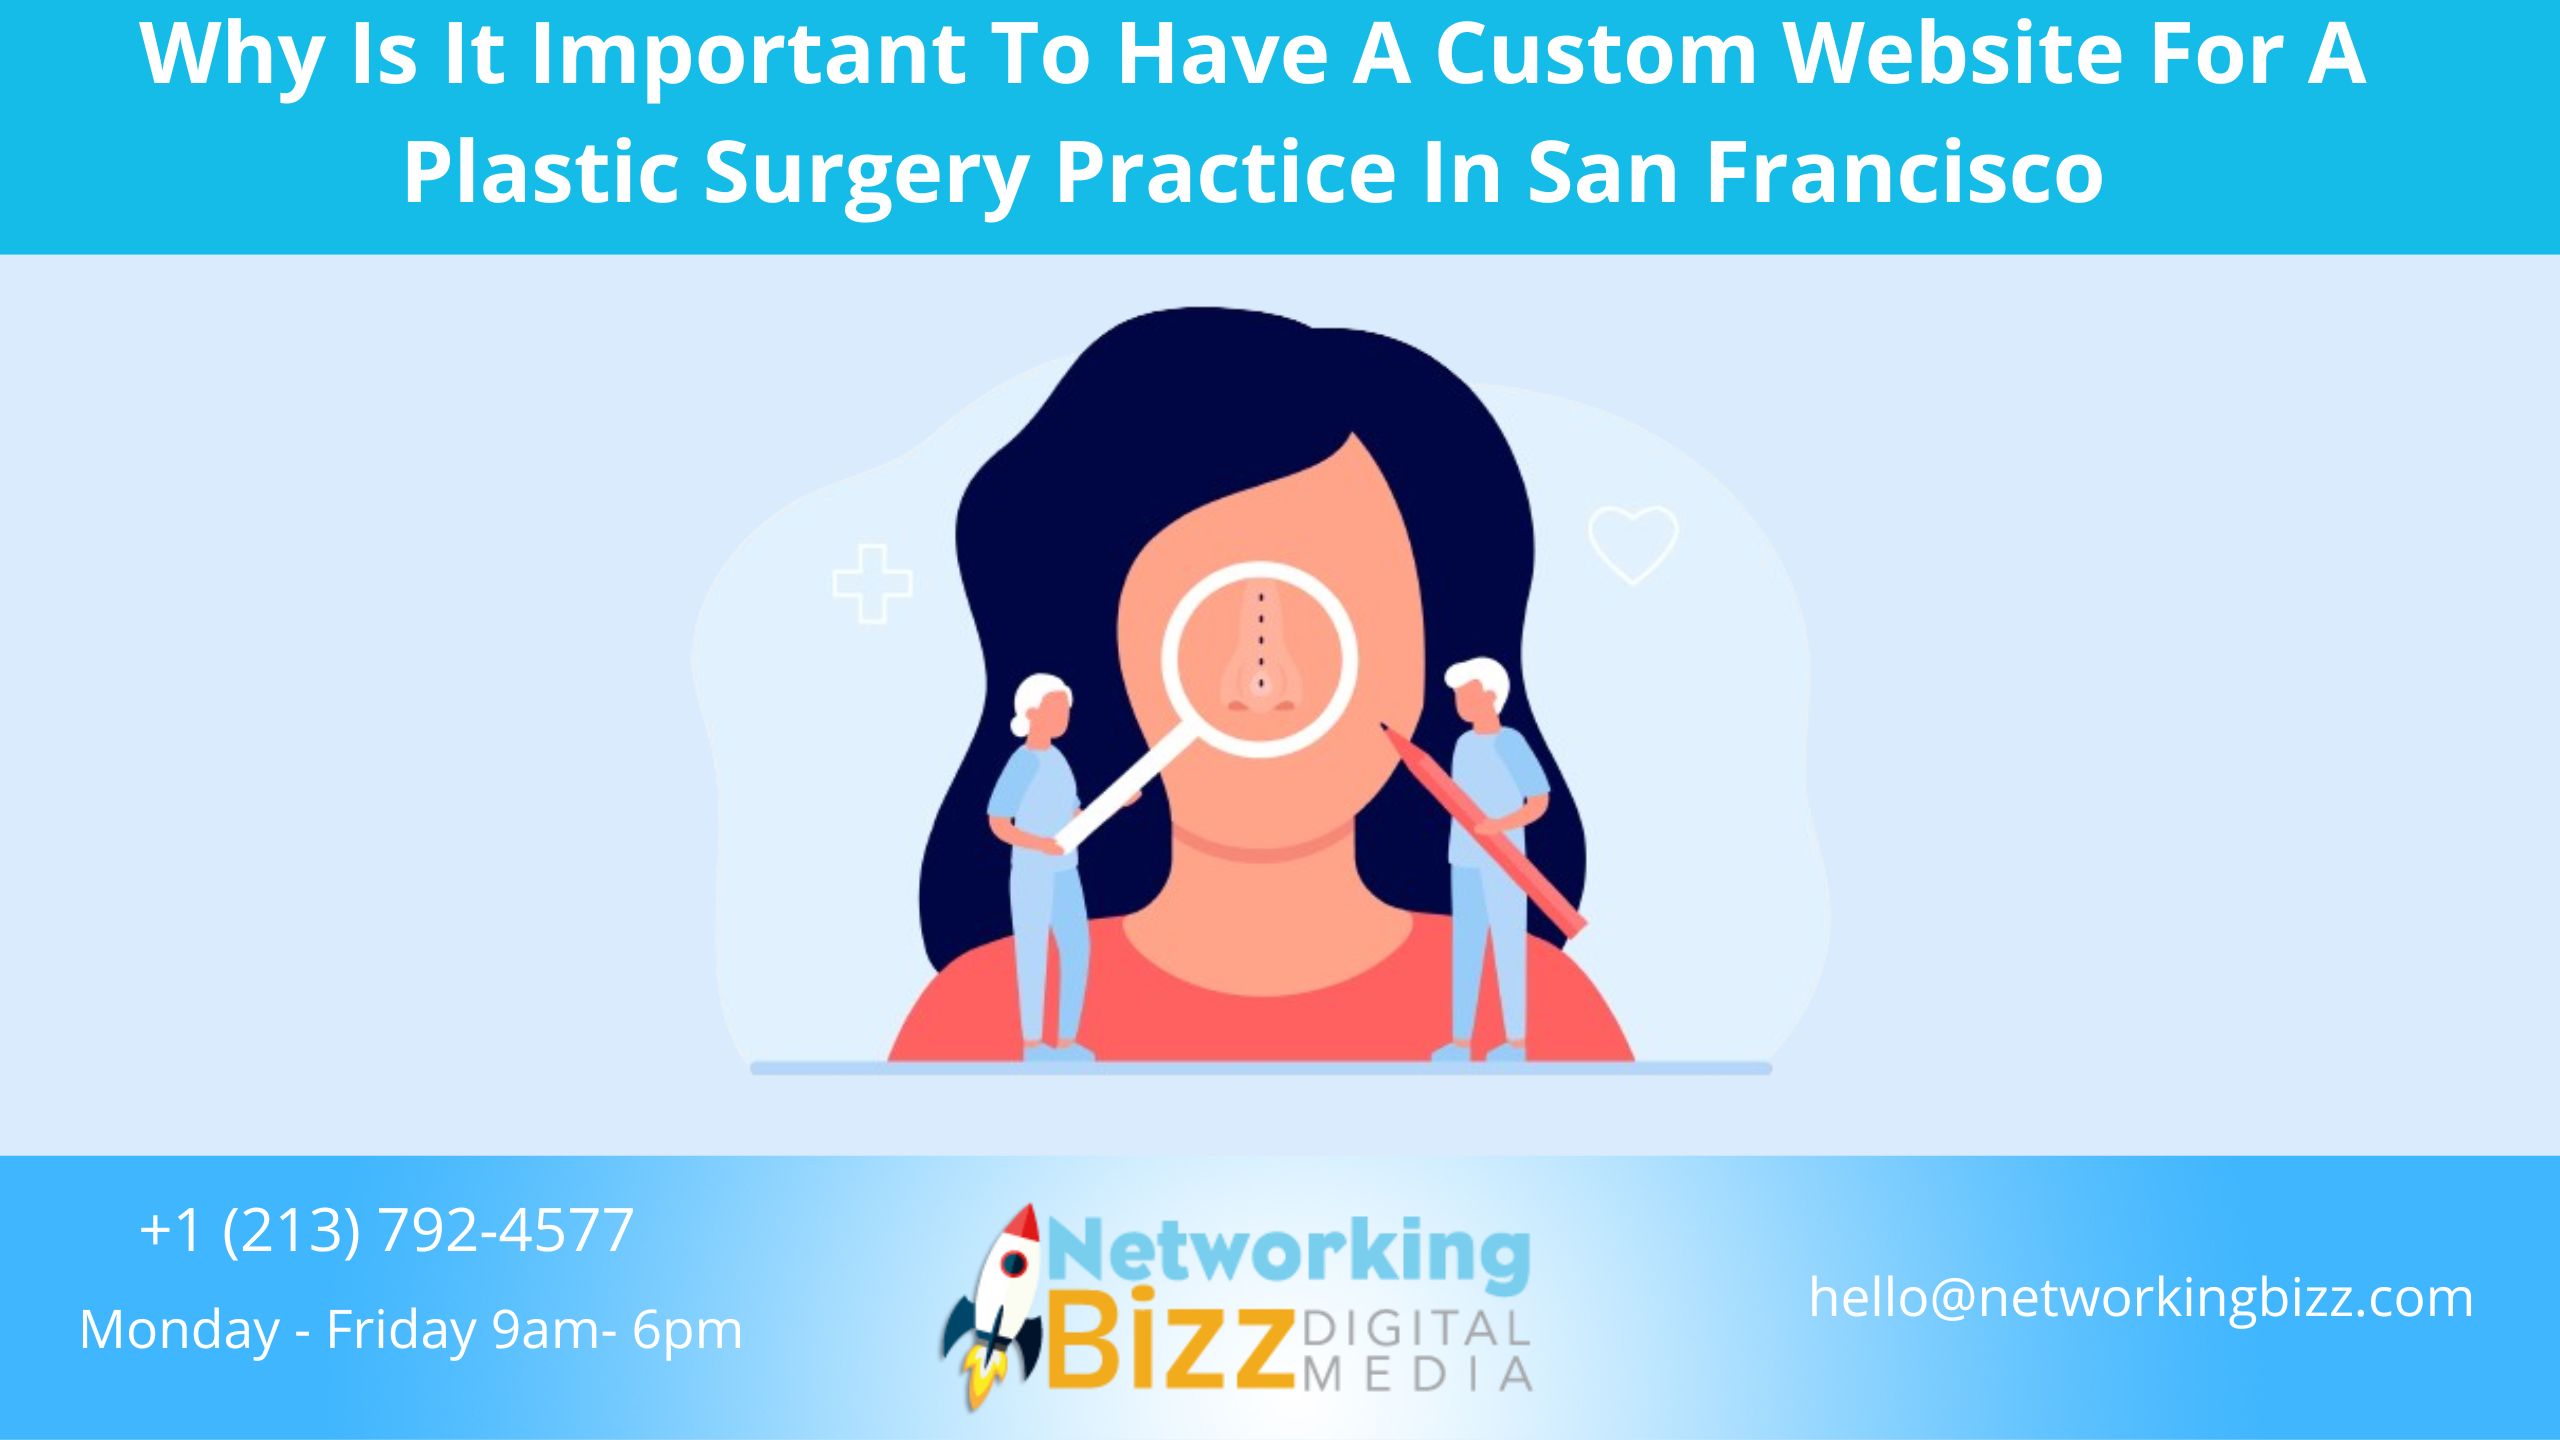 Why Is It Important To Have A Custom Website For A Plastic Surgery Practice In San Francisco